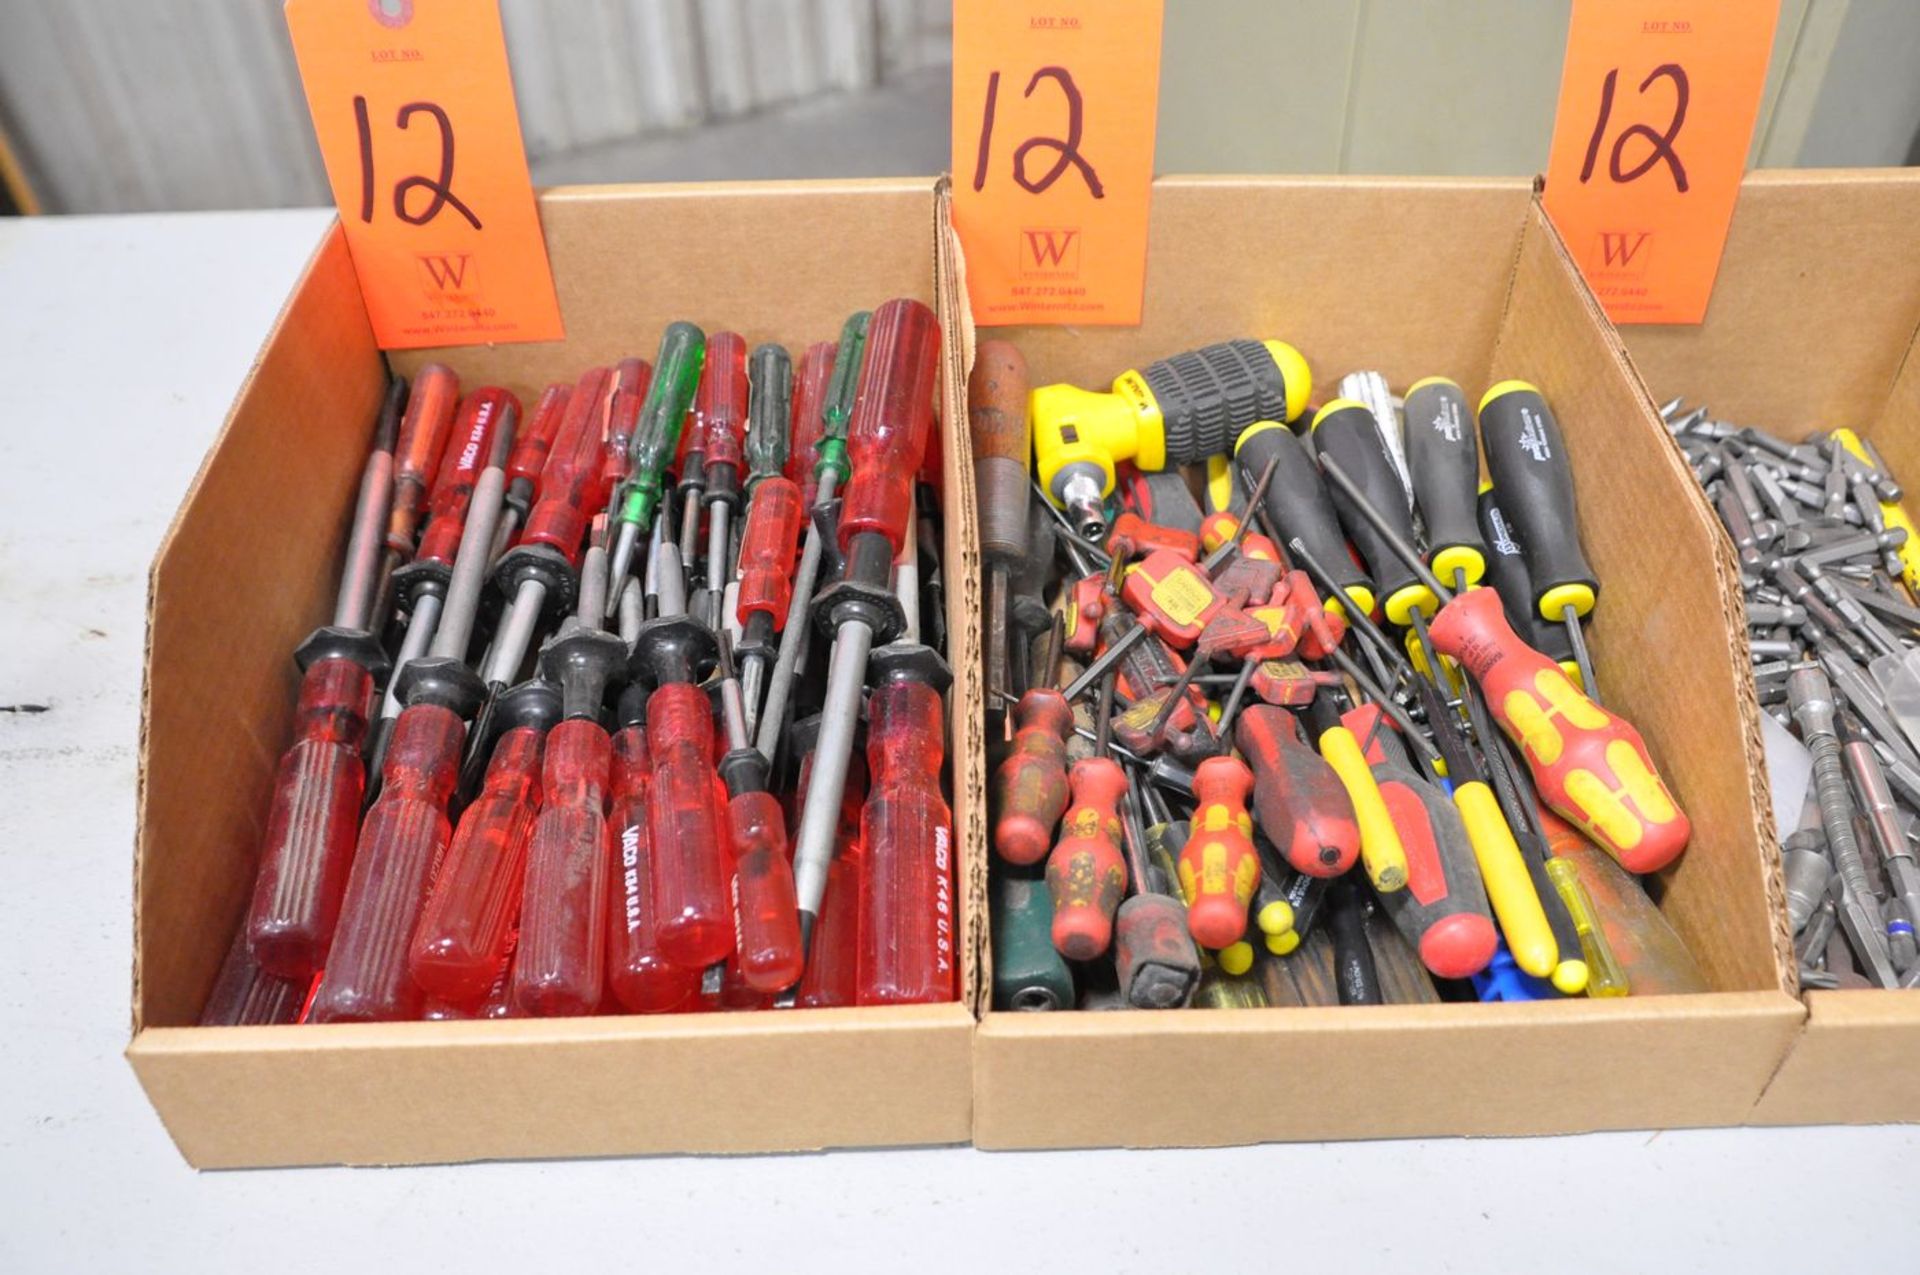 Lot - Screwdriver Bits, Pin Popper Tools, Split Blade Screwdrivers and Torx Drivers, in (4) Boxes - Image 2 of 3